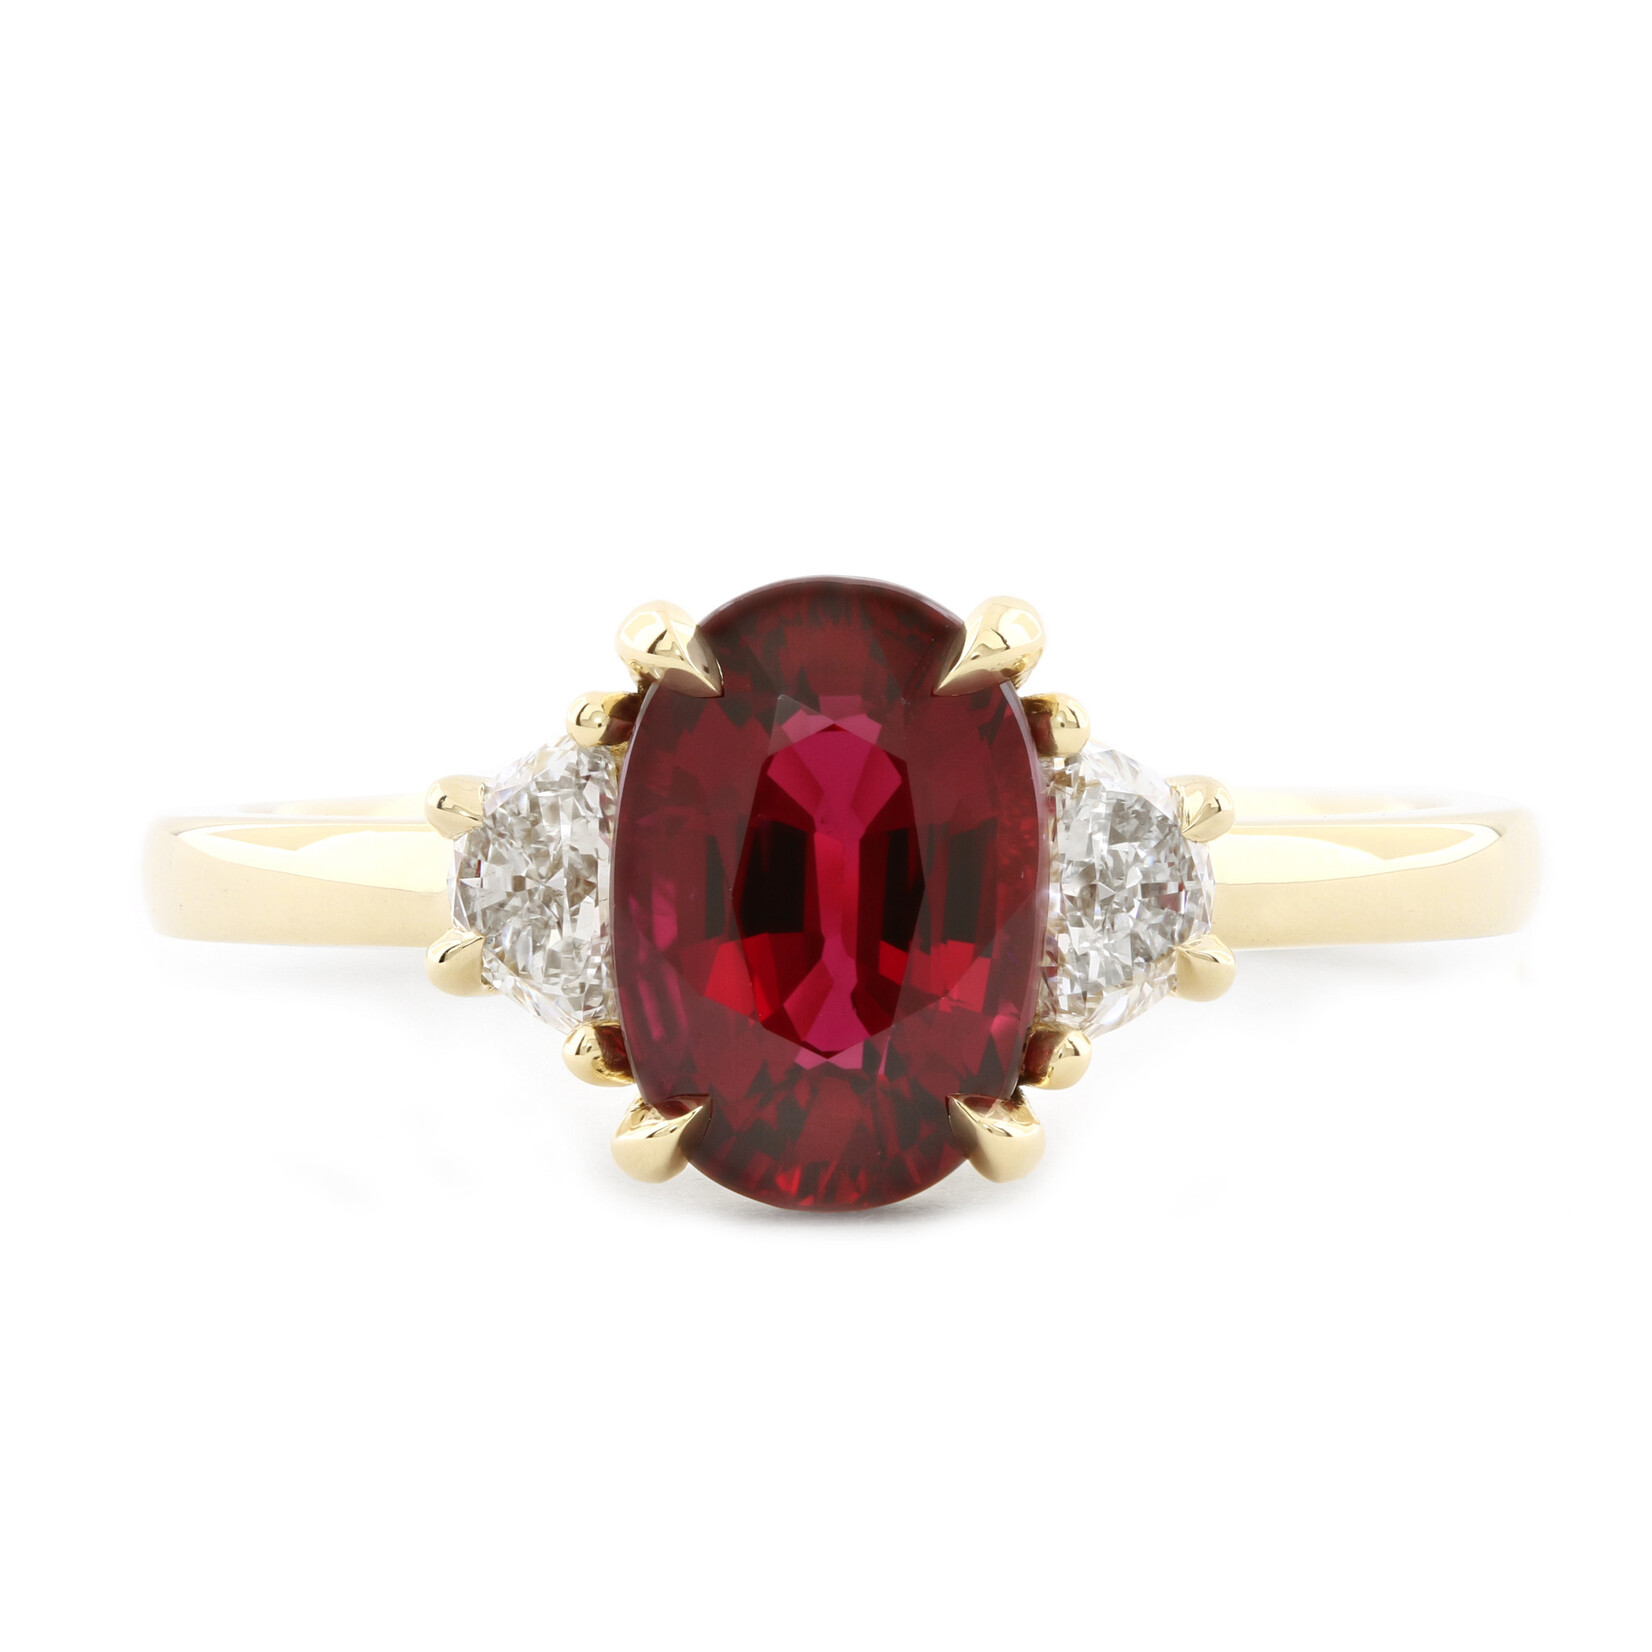 Baxter Moerman Penelope Ring with Ruby and Diamonds